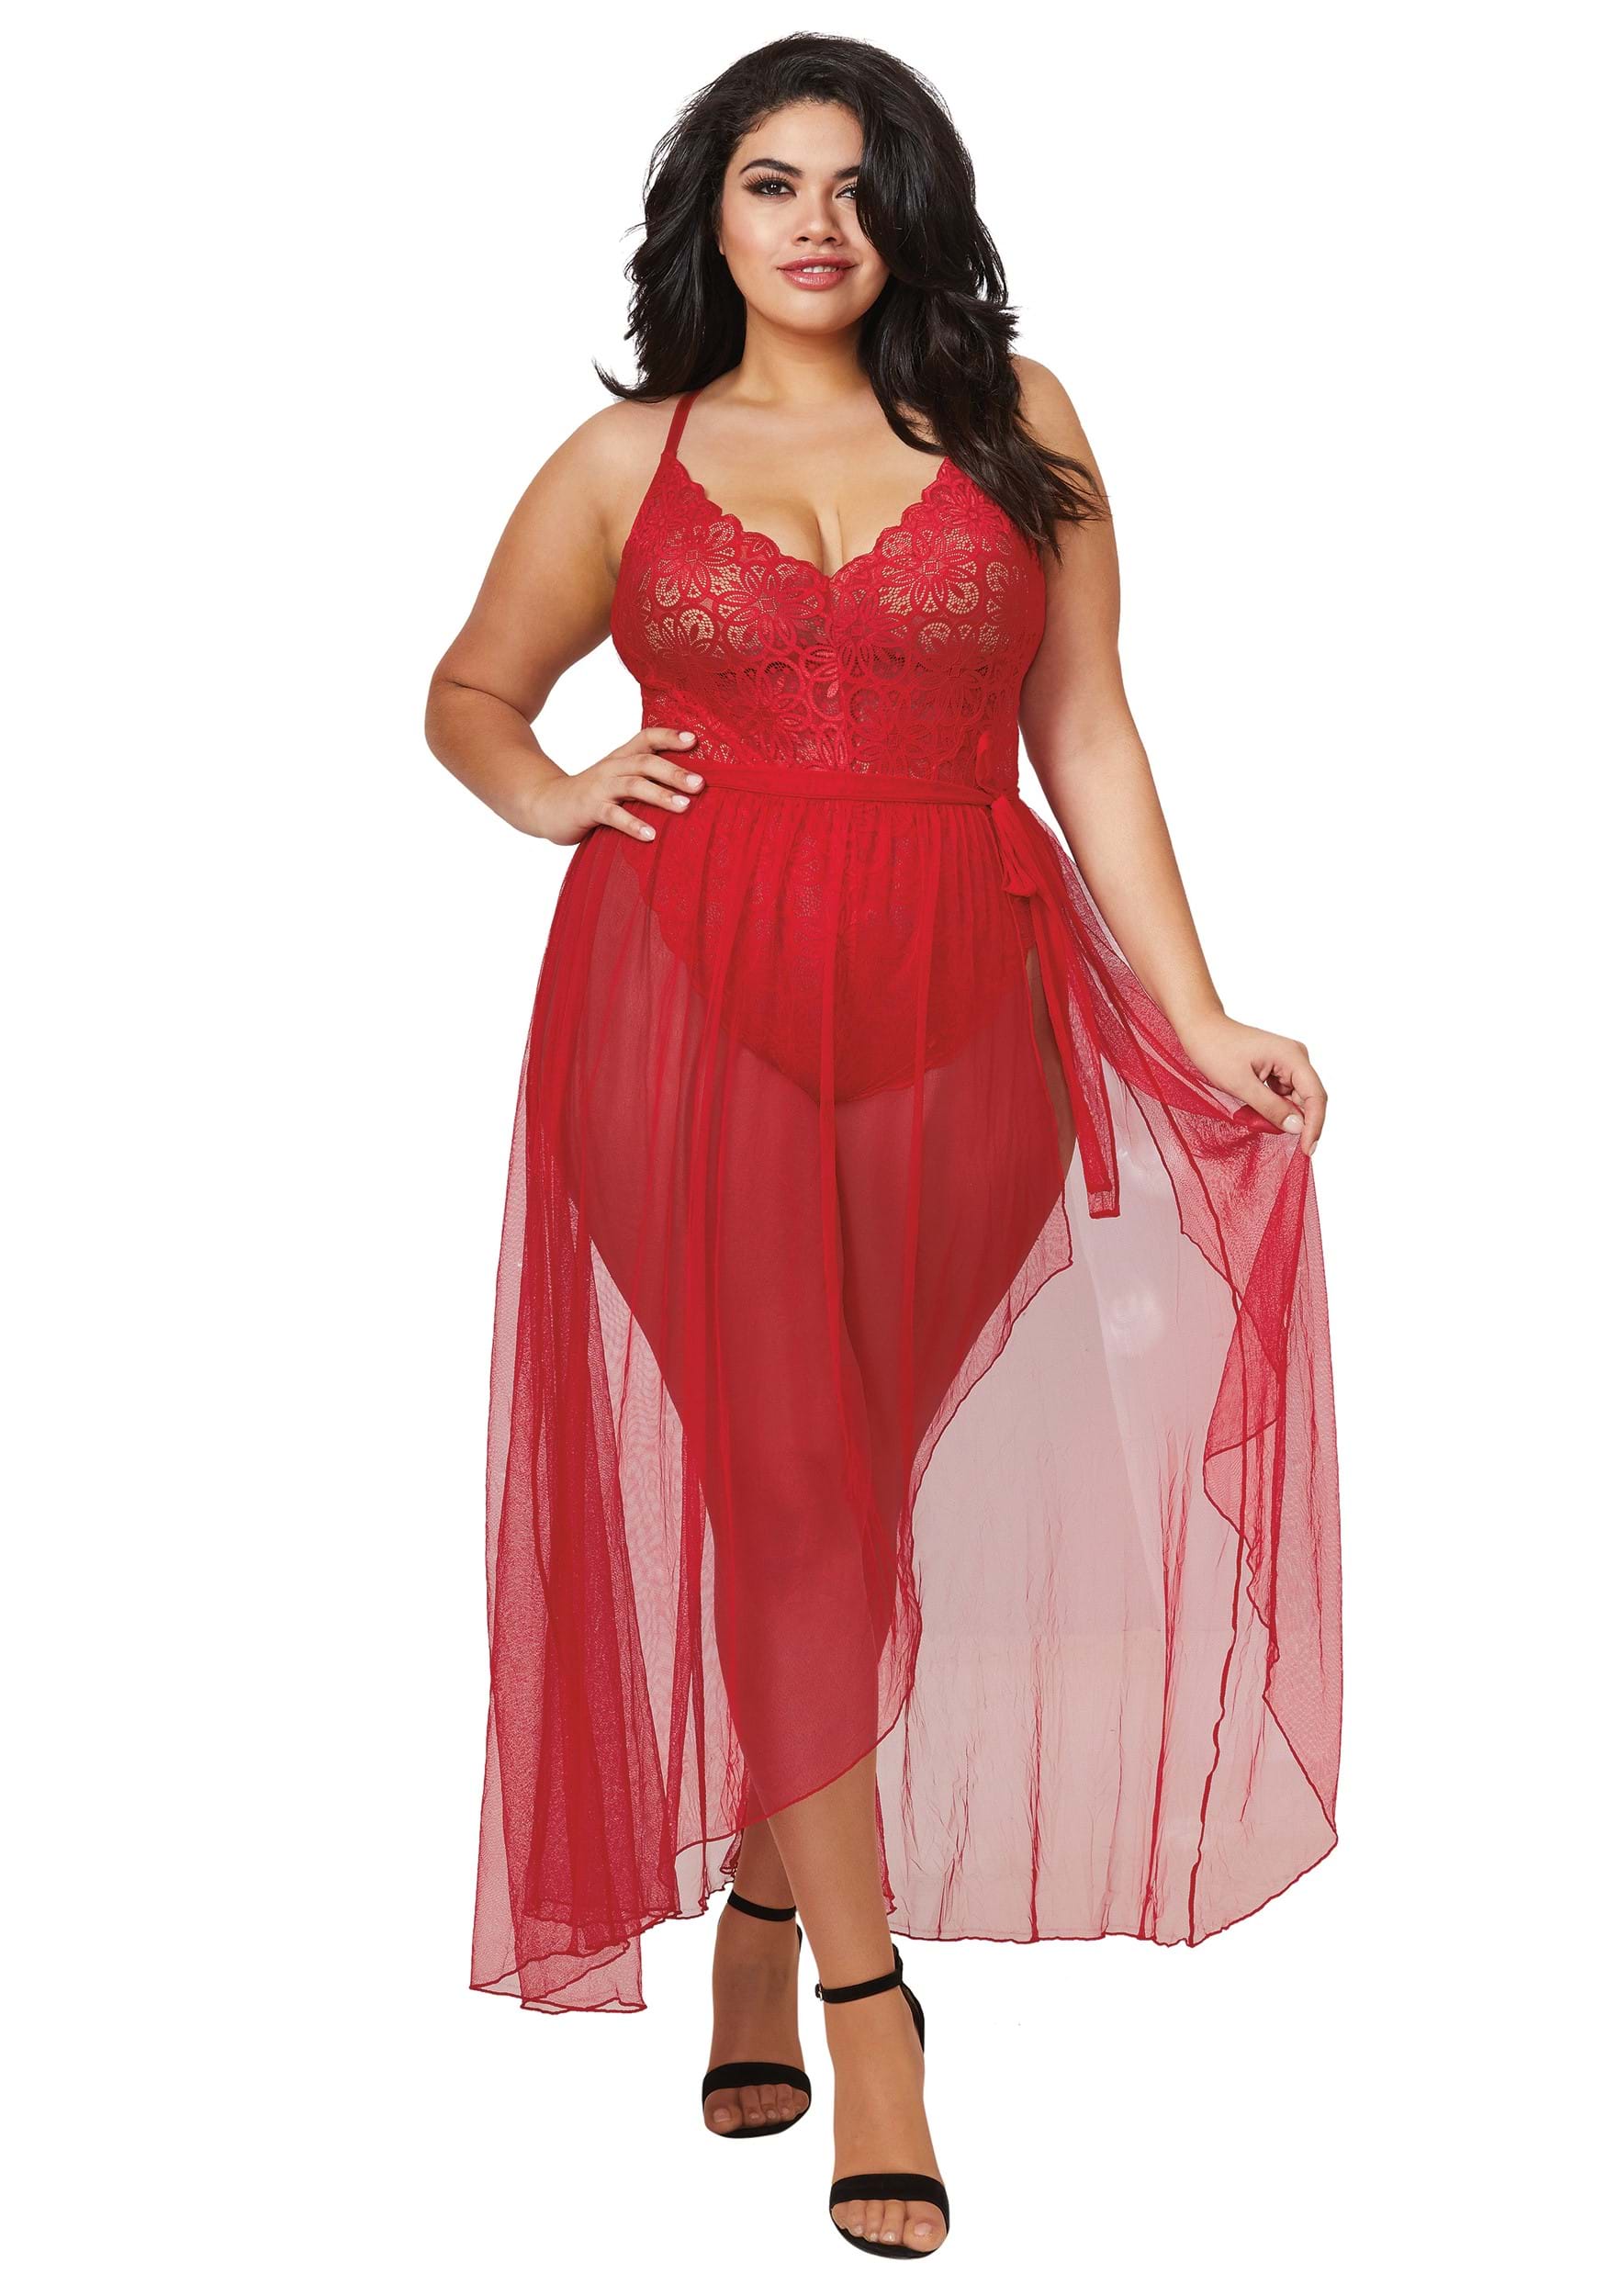 Women's Plus Size Stretch Lace Teddy & Sheer Skirt Set , Adult Lingerie